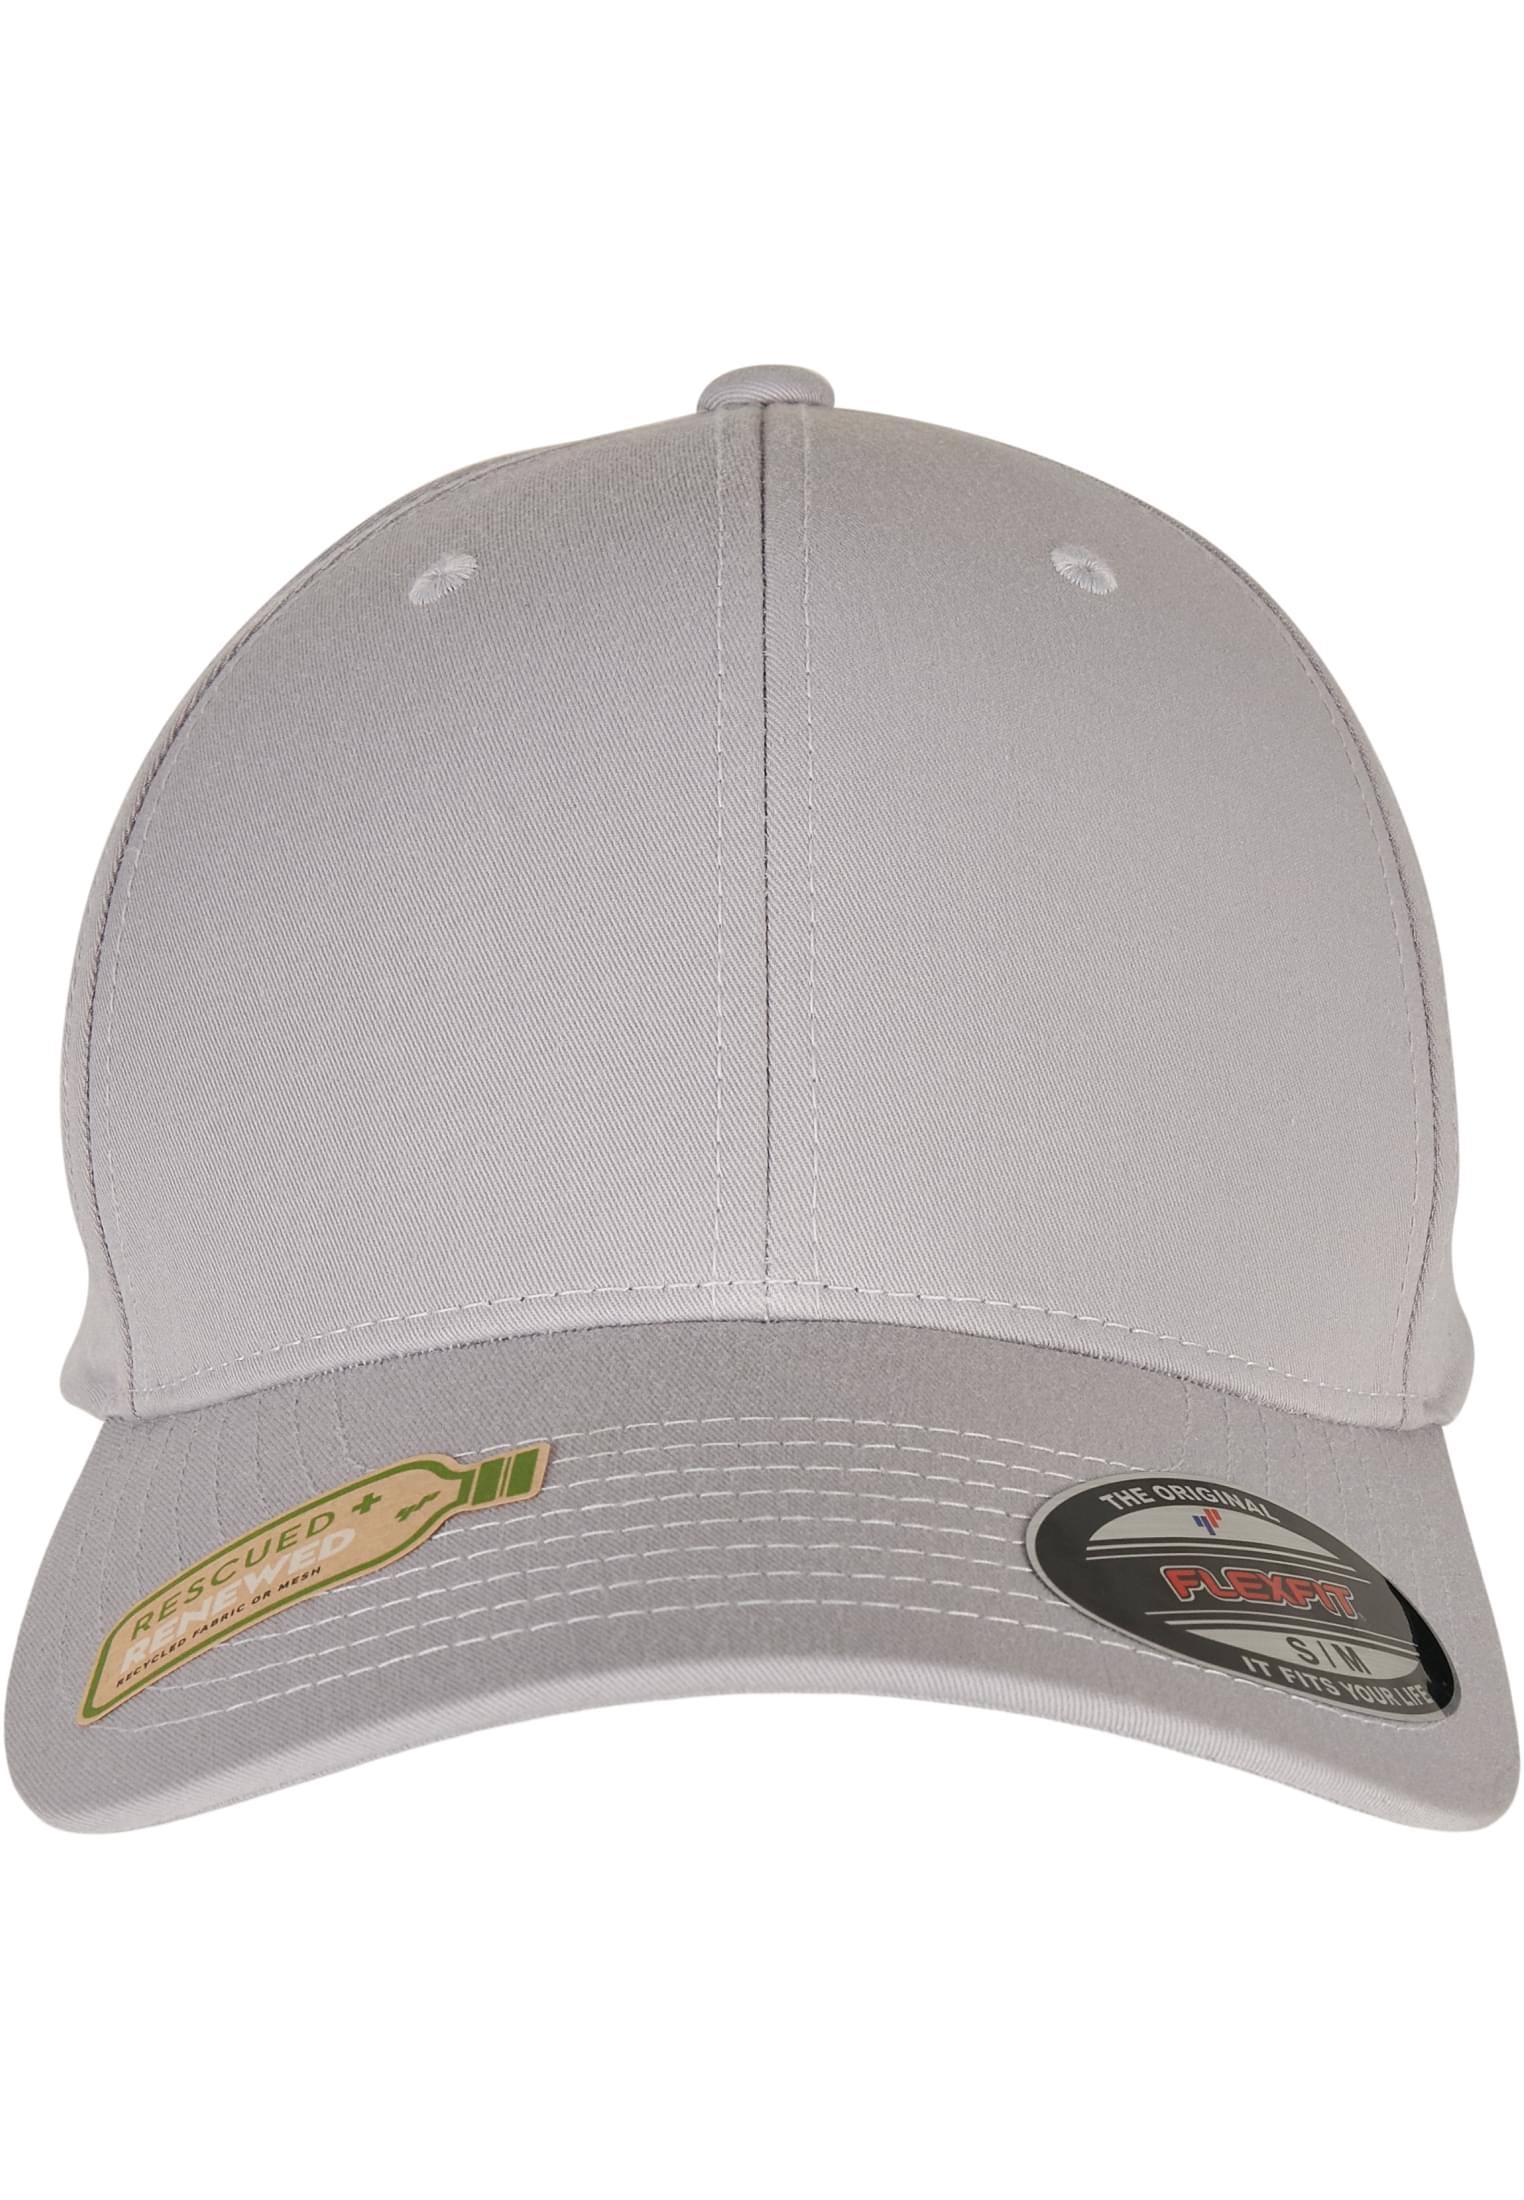 Polyester Cap-6277RP Flexfit Recycled